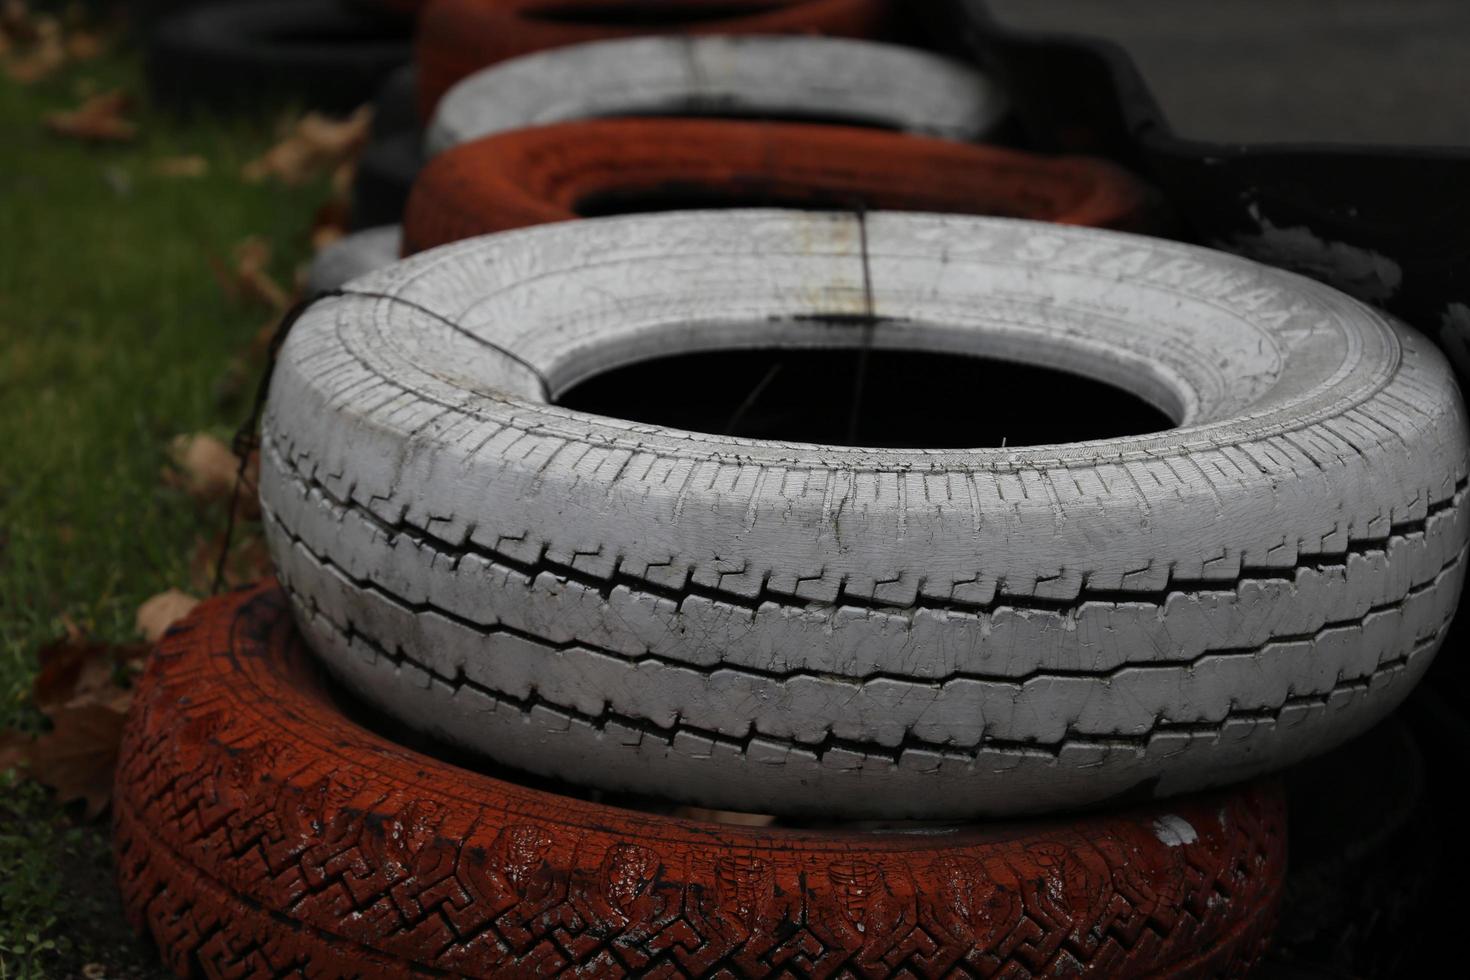 karting track area colorful tires fun adrenaline photo